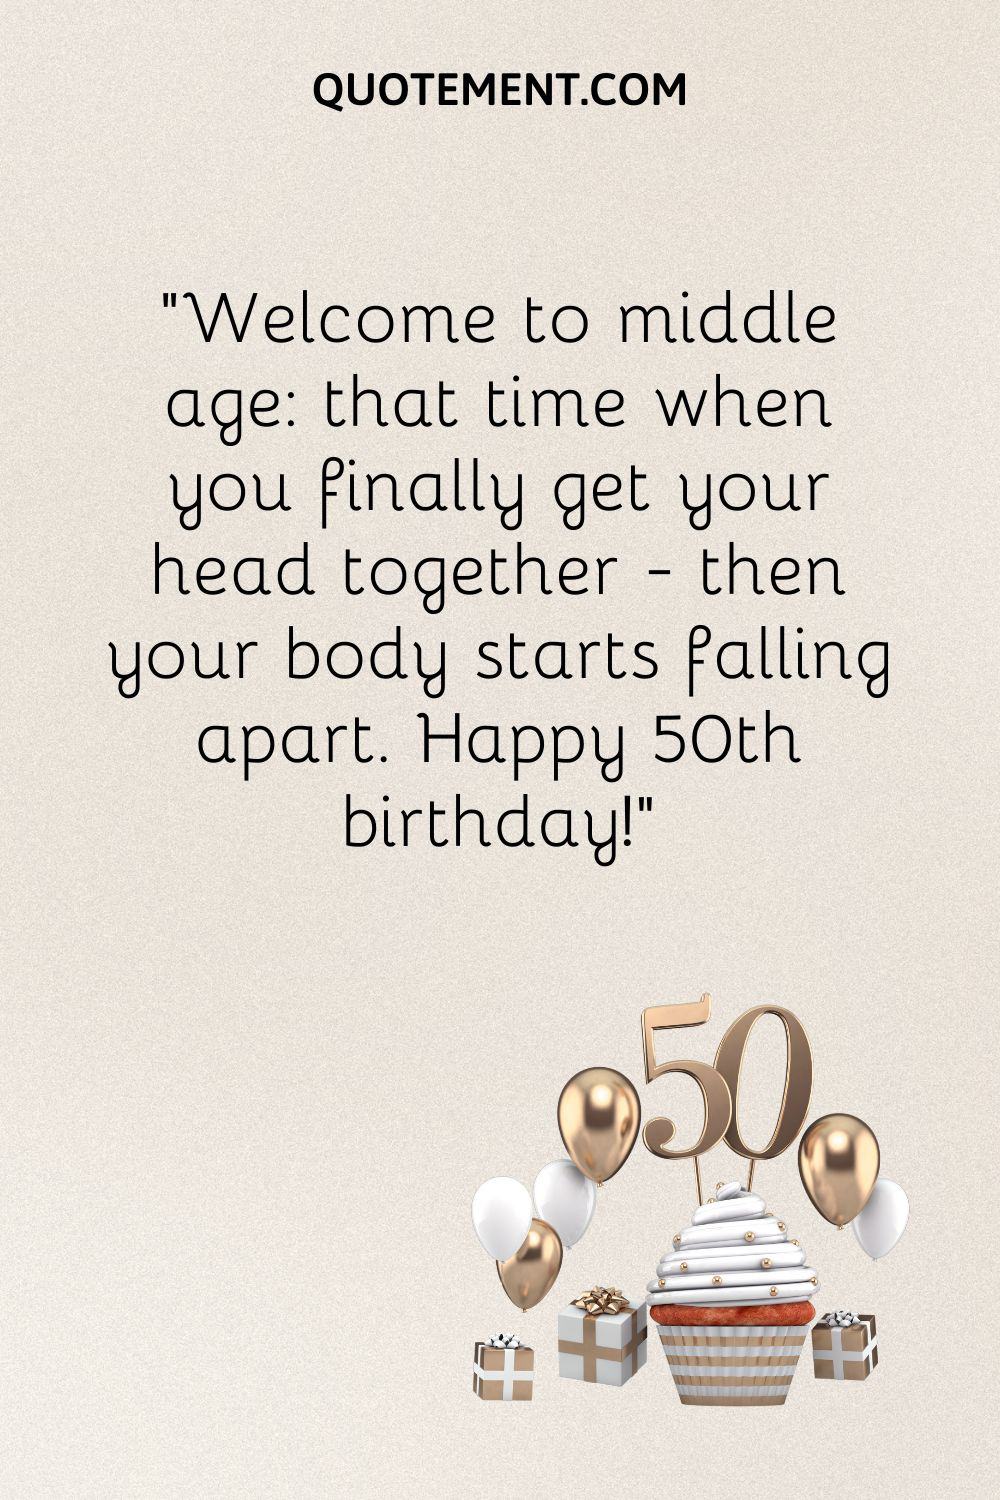 “Welcome to middle age that time when you finally get your head together - then your body starts falling apart. Happy 50th birthday!”